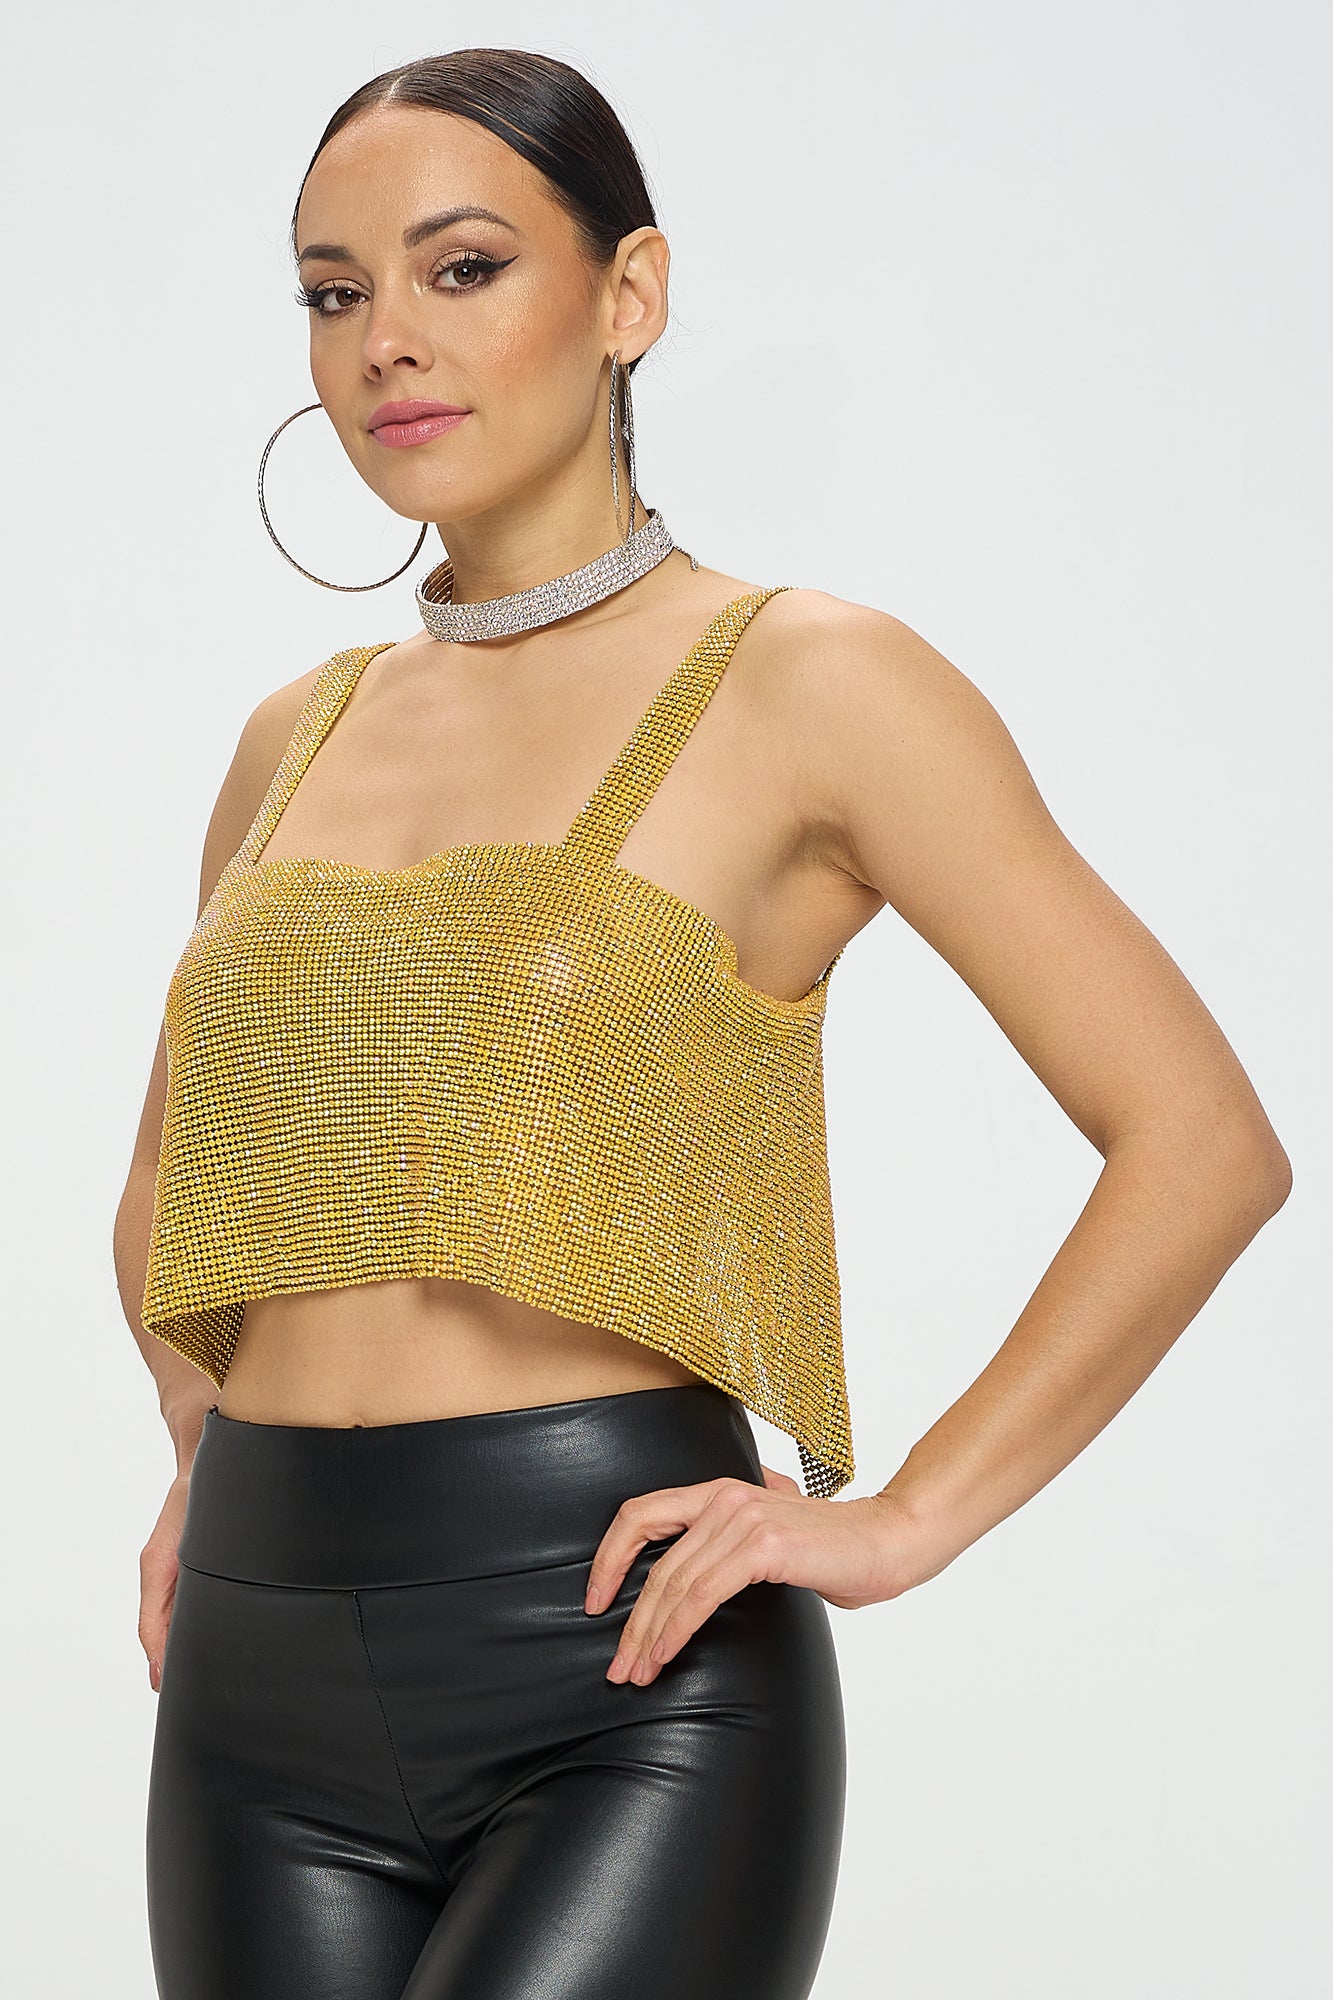 SOLID METALLIC CHAIN DETAIL BACKLESS CROP TOP